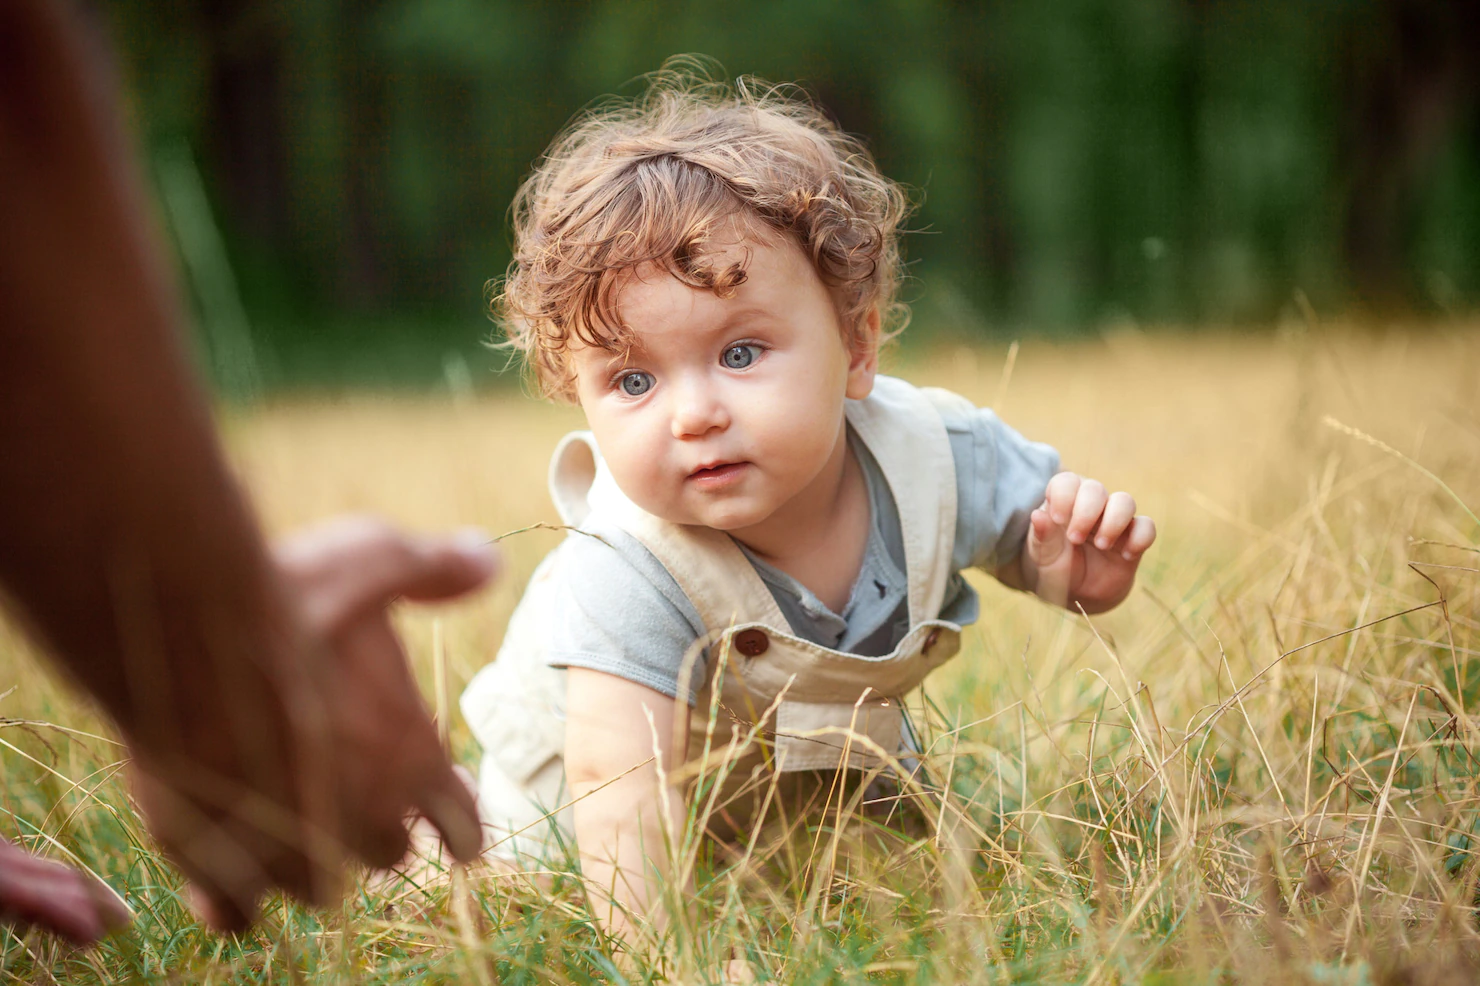 little-baby-year-old-child-grass-sunny-summer-day_155003-9978